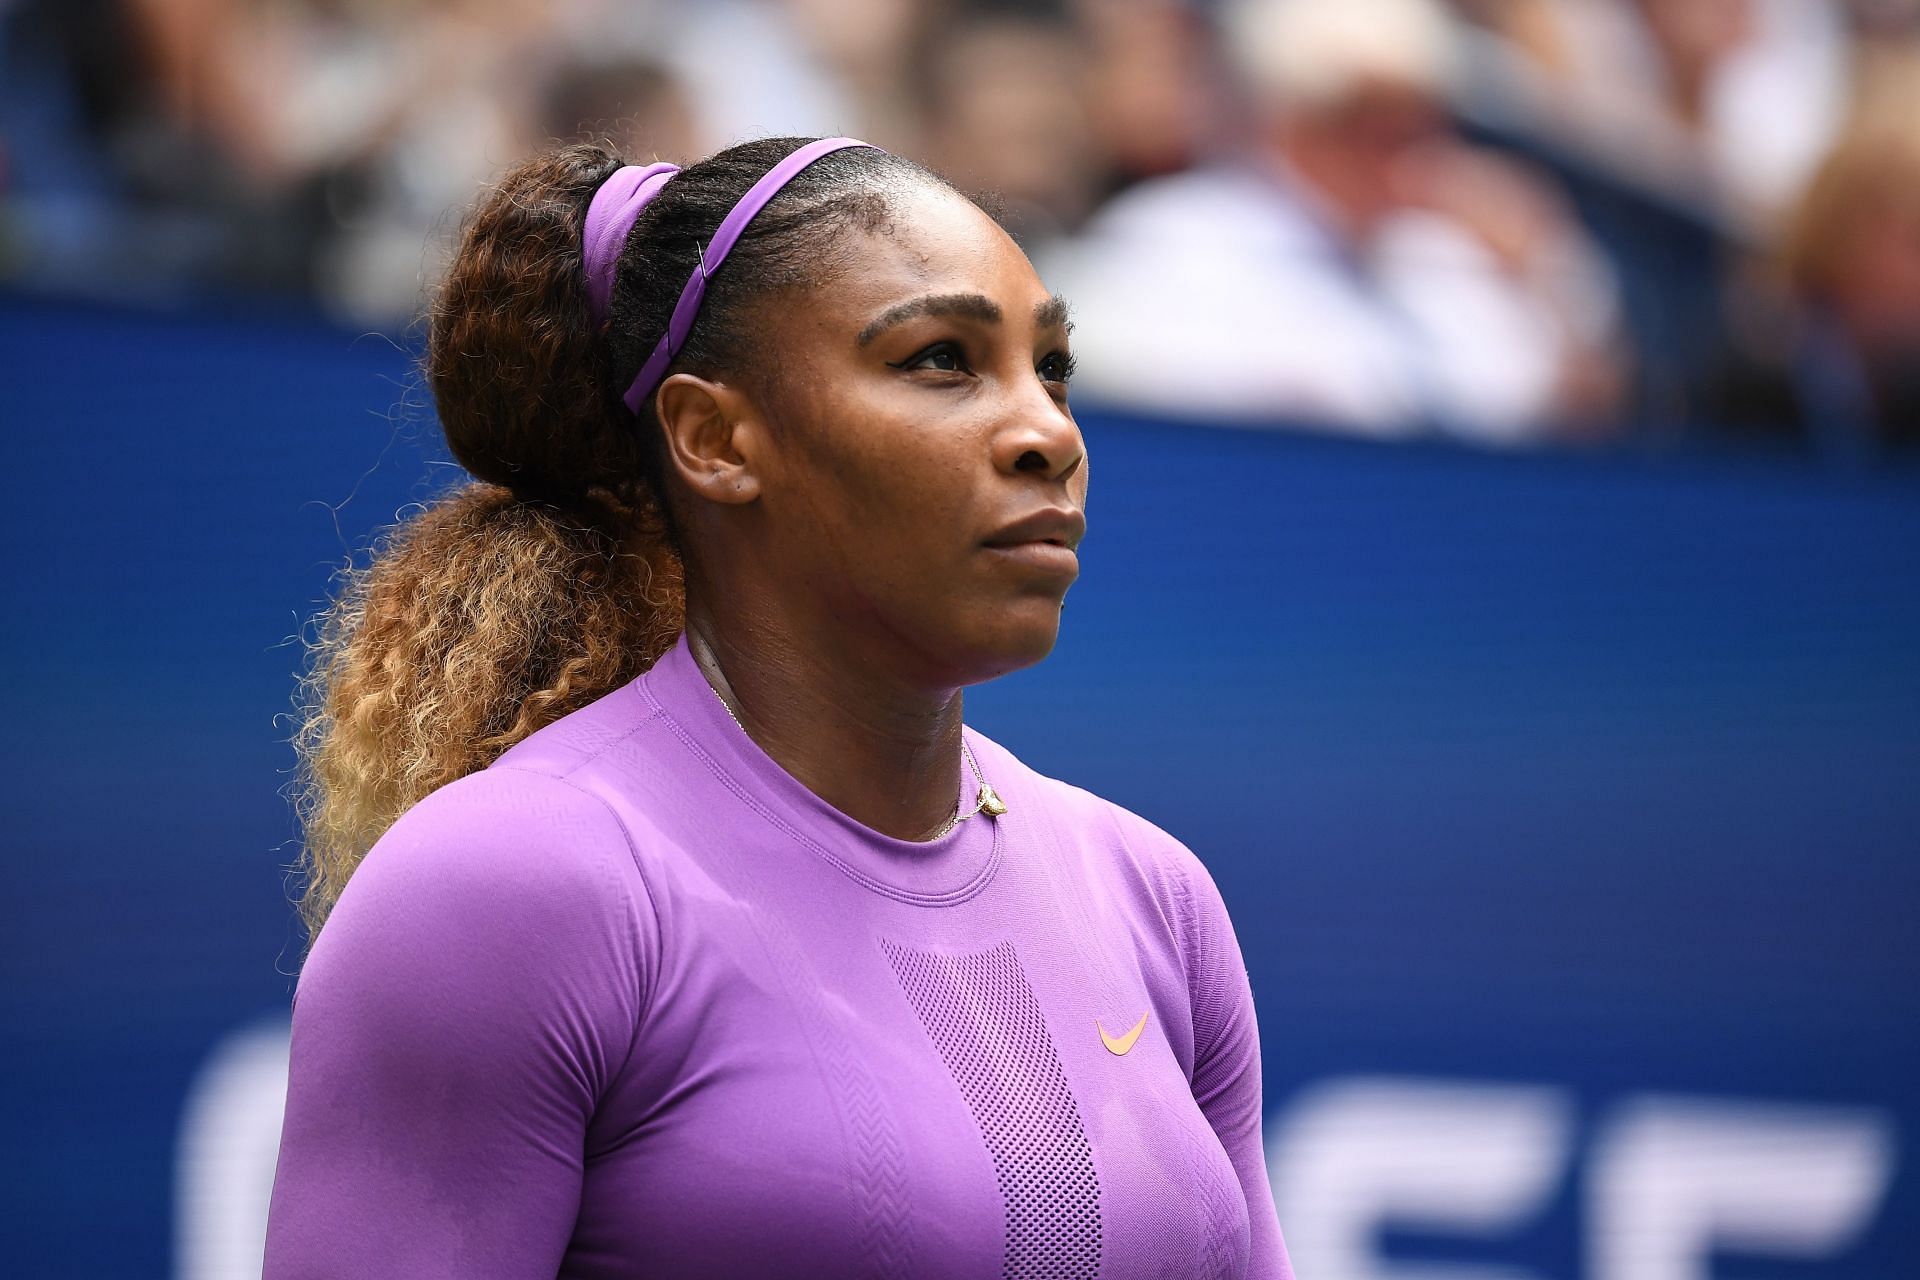 Serena Williams spoke about learning to be diligent while making intvestments in a recent interview